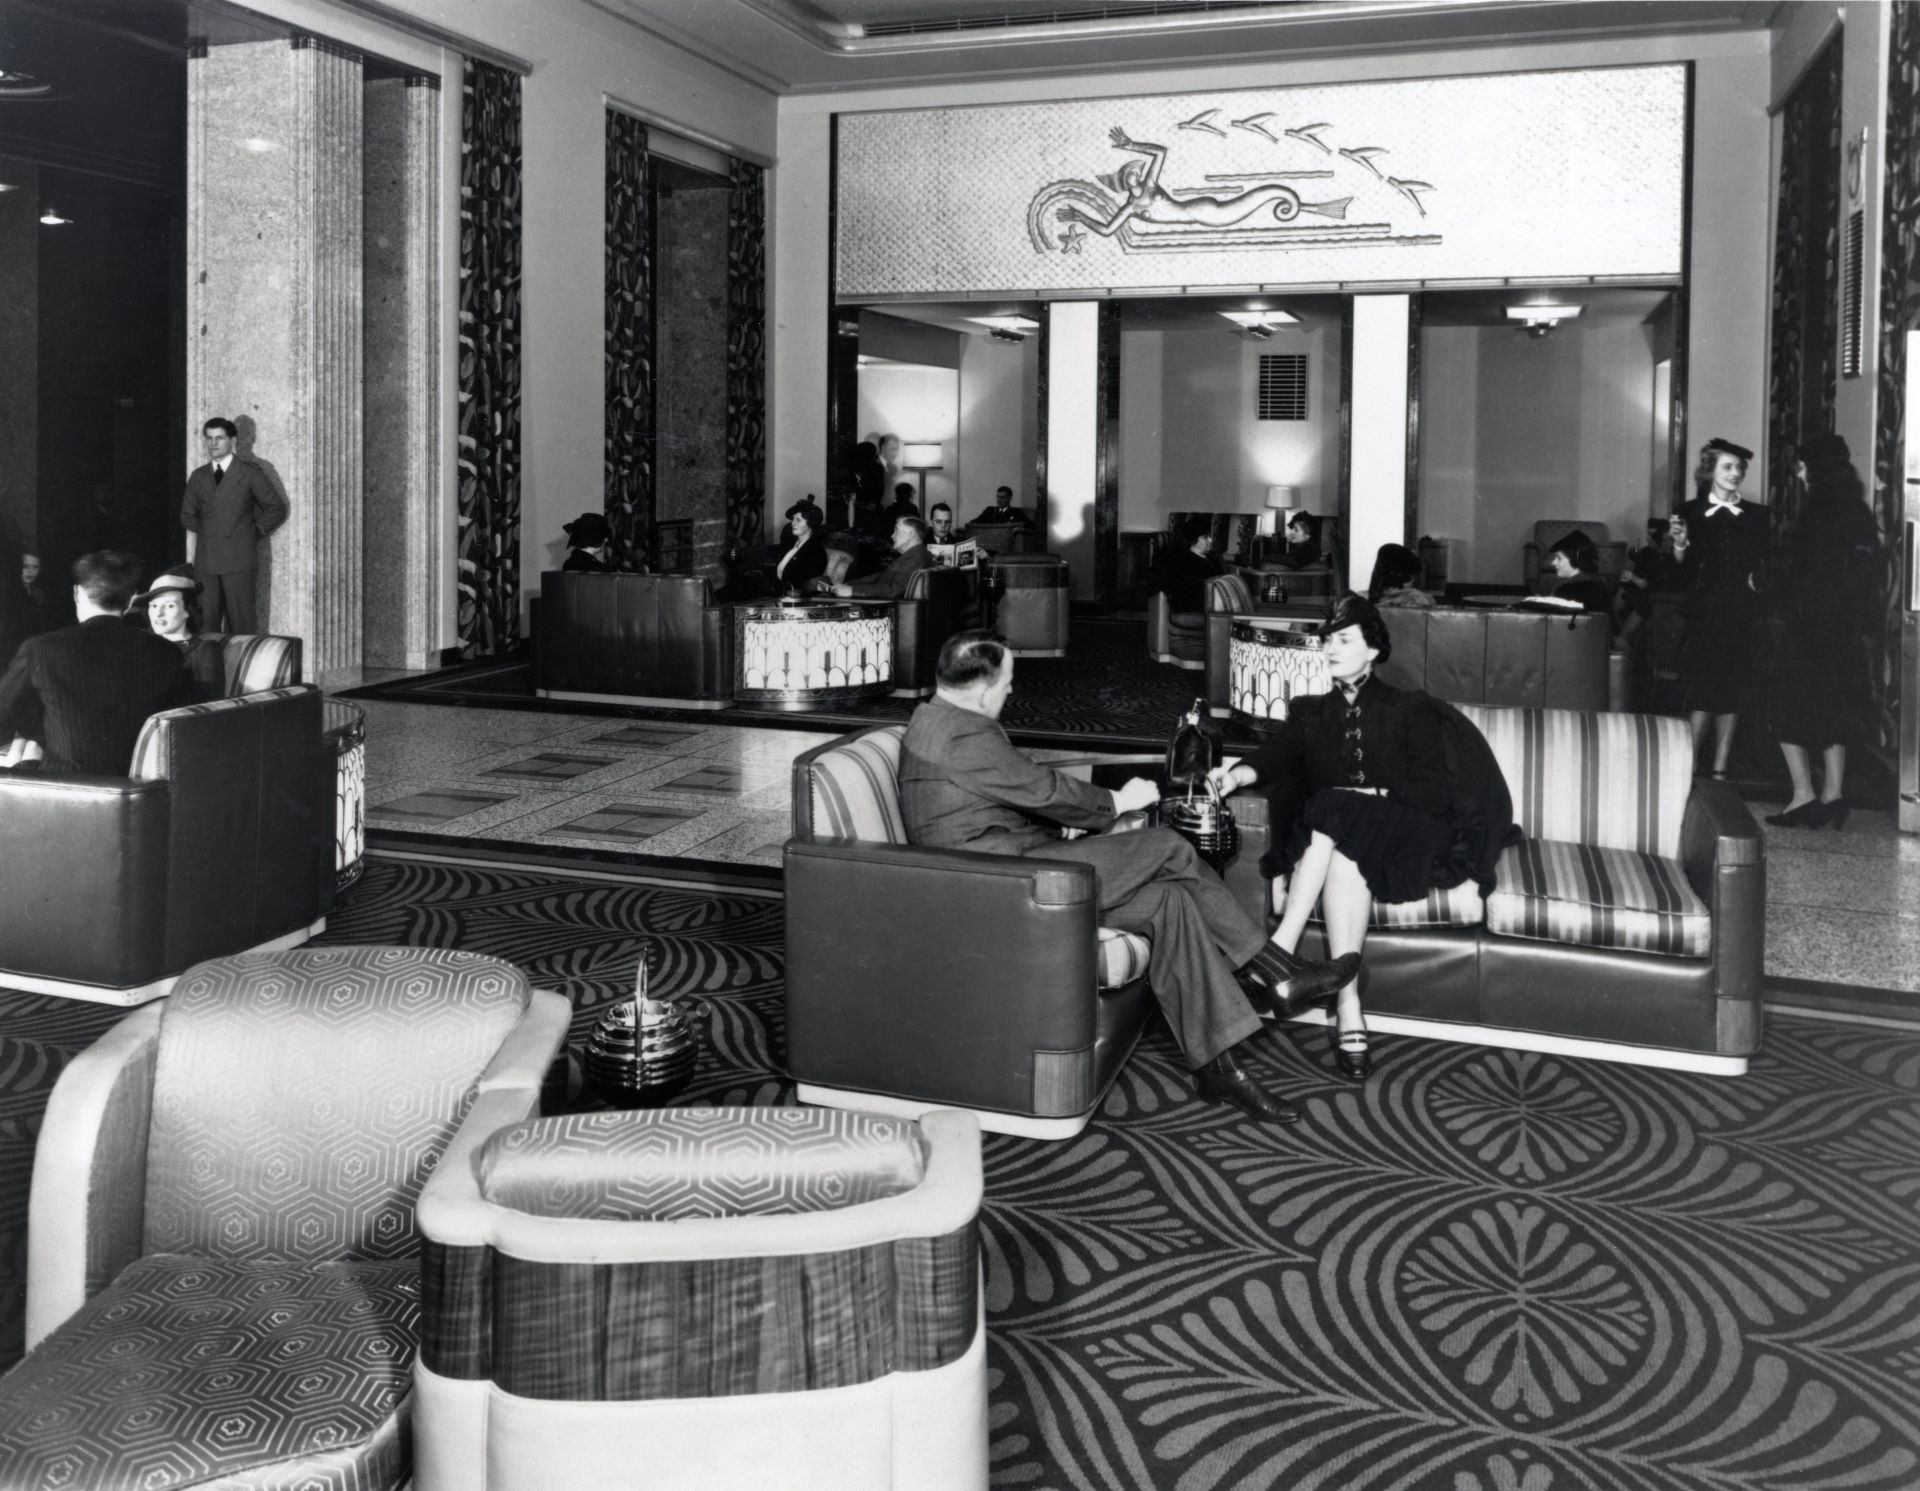 Guests sitting in Hotel Vancouver's art moderne lobby design in 1939